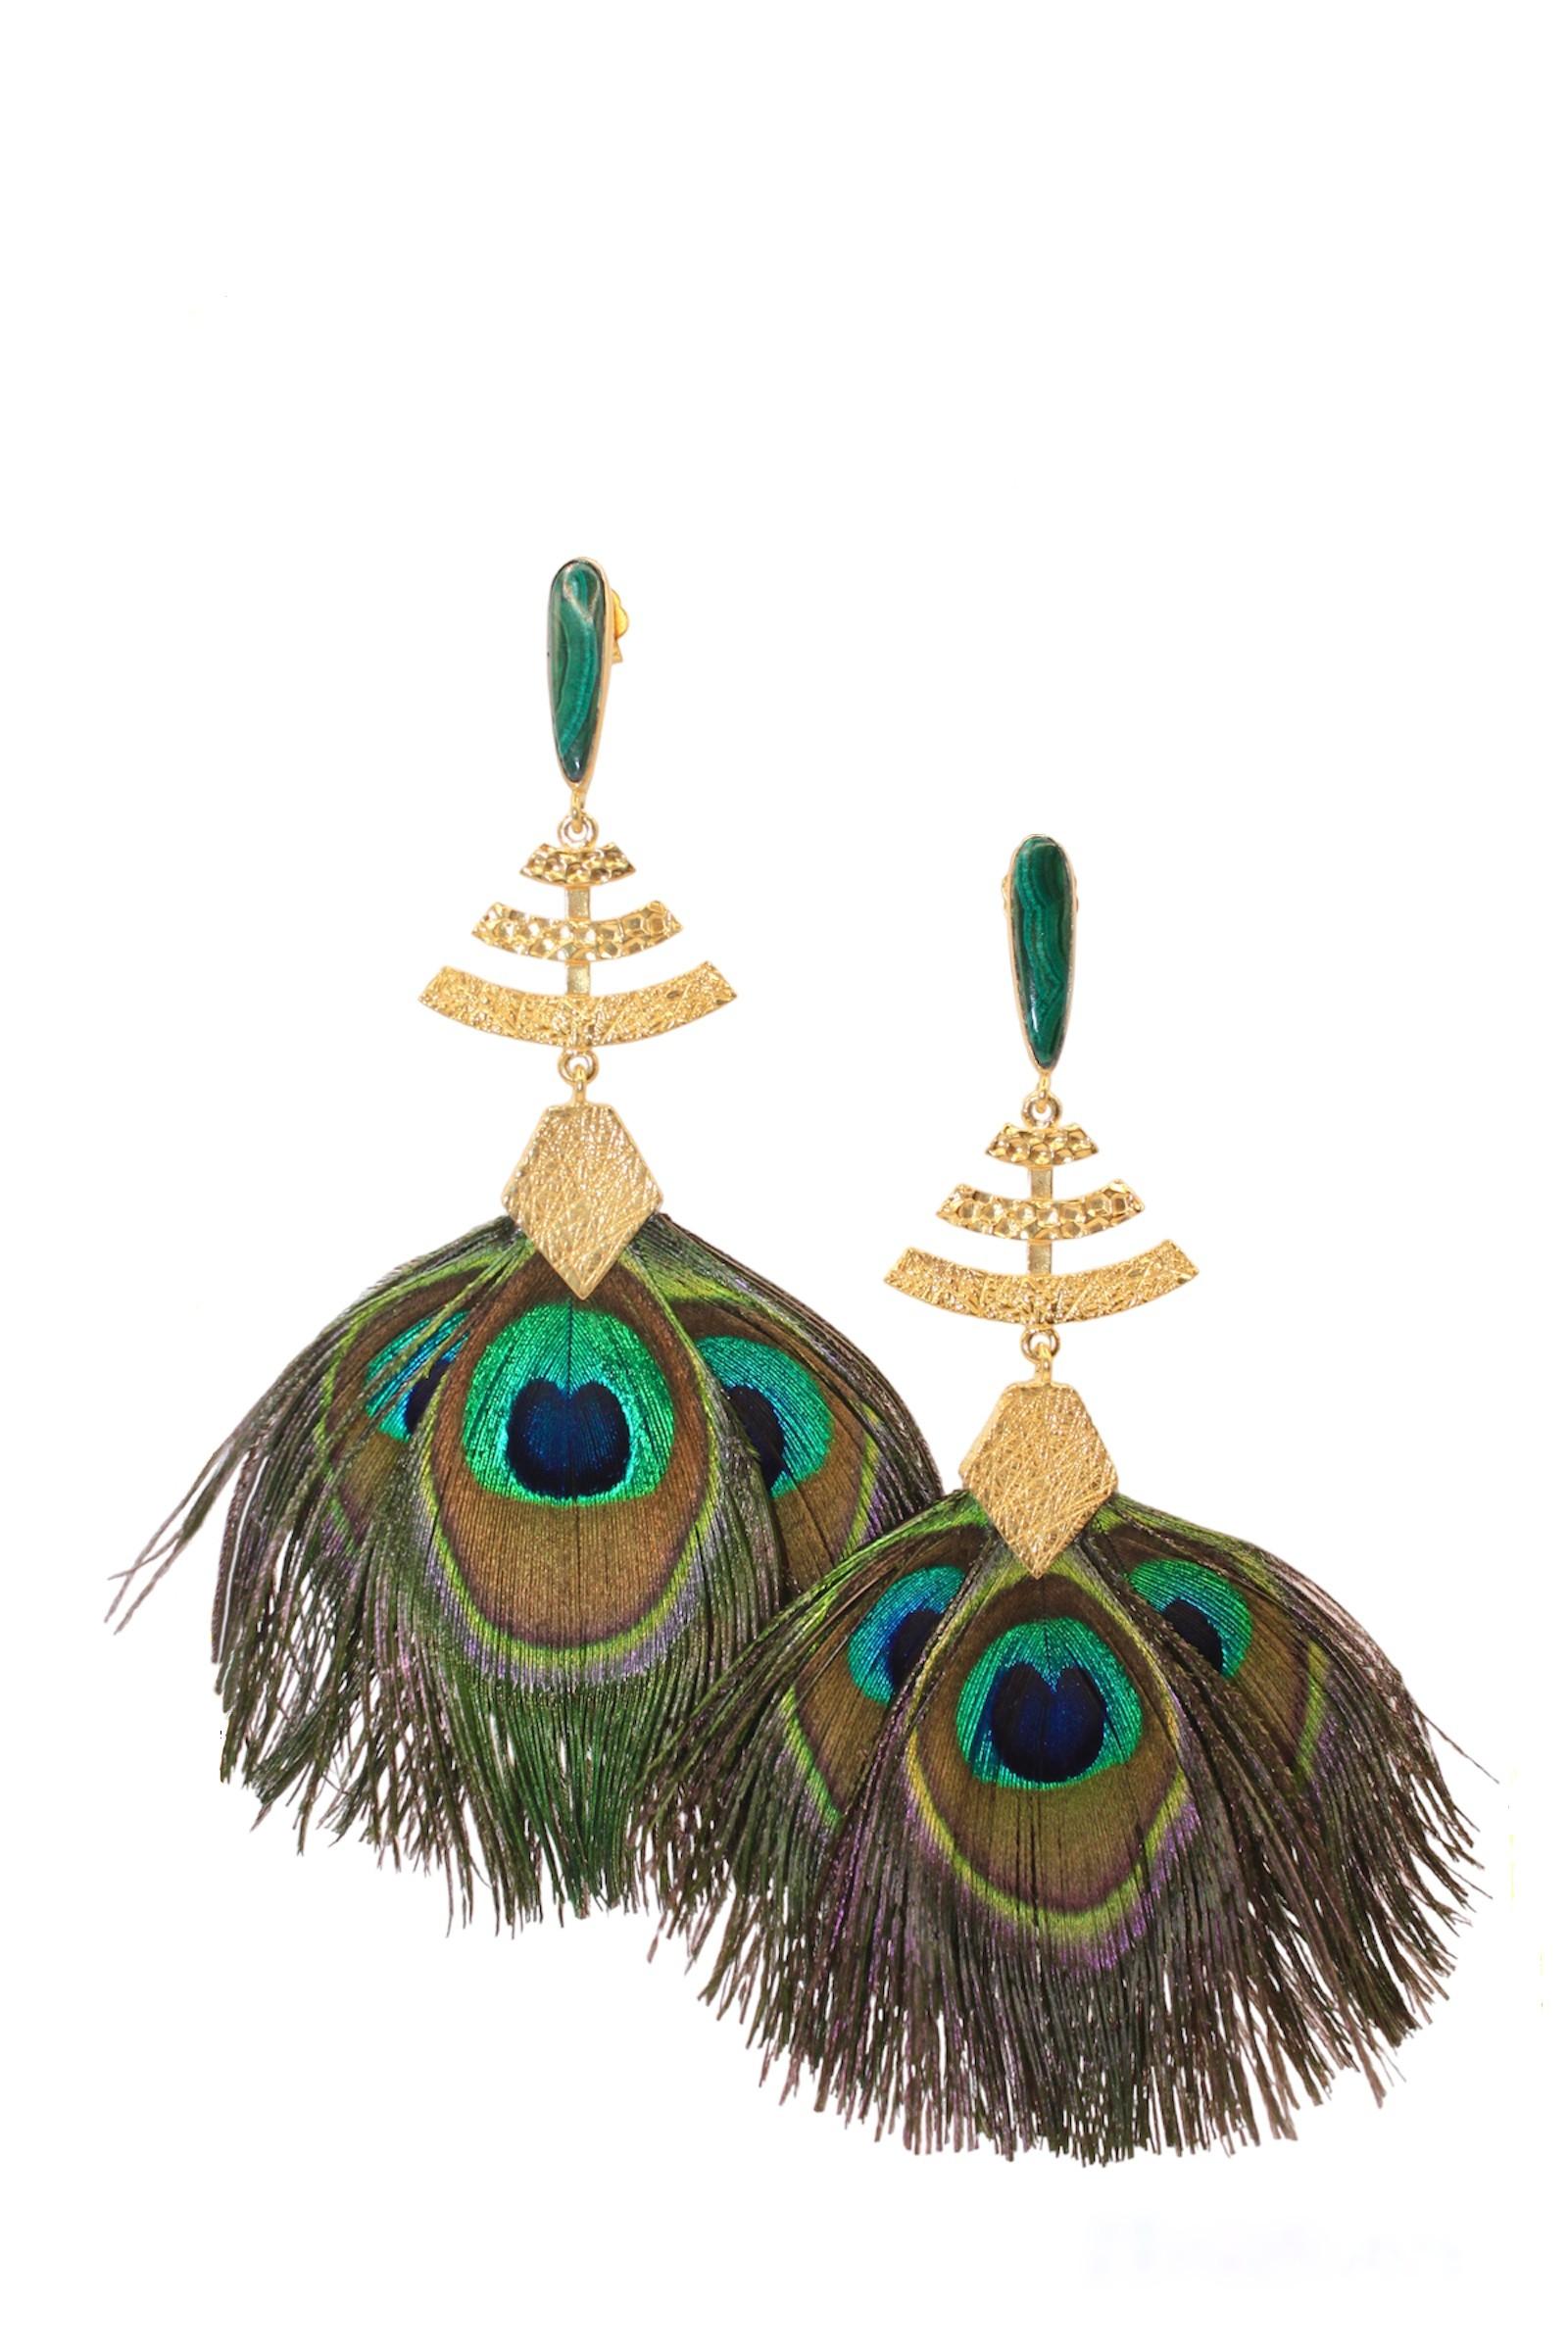 This Made to Order Abanico Earrings are inspired by the splendor of Pre-Columbian art. These remarkable earrings harmoniously blend 14k yellow gold vibrant peacock feathers, and seductive malachite stones, creating a unique and captivating timeless